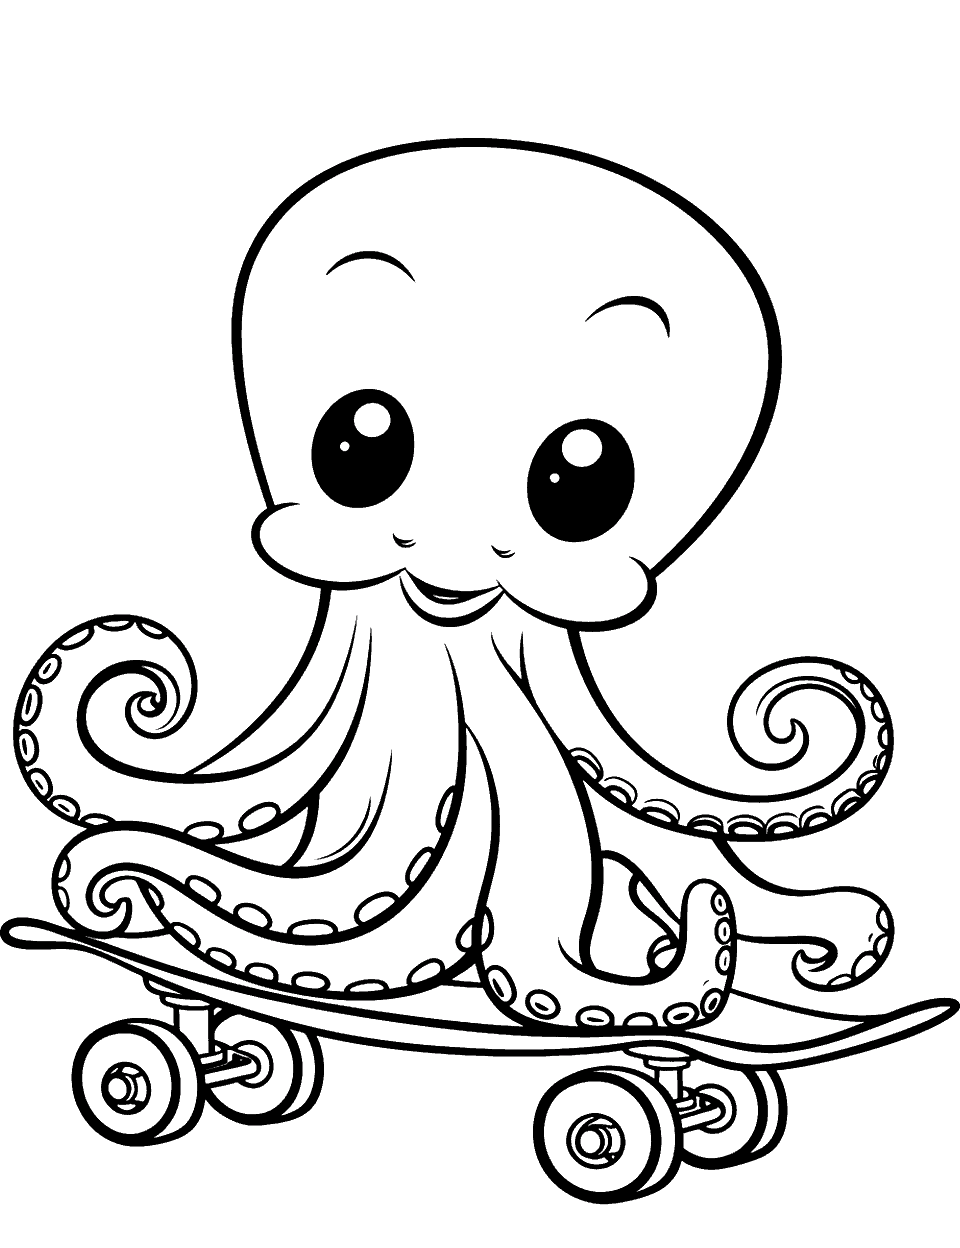 Octopus on a Skateboard Coloring Page - A cool octopus skillfully riding a skateboard.